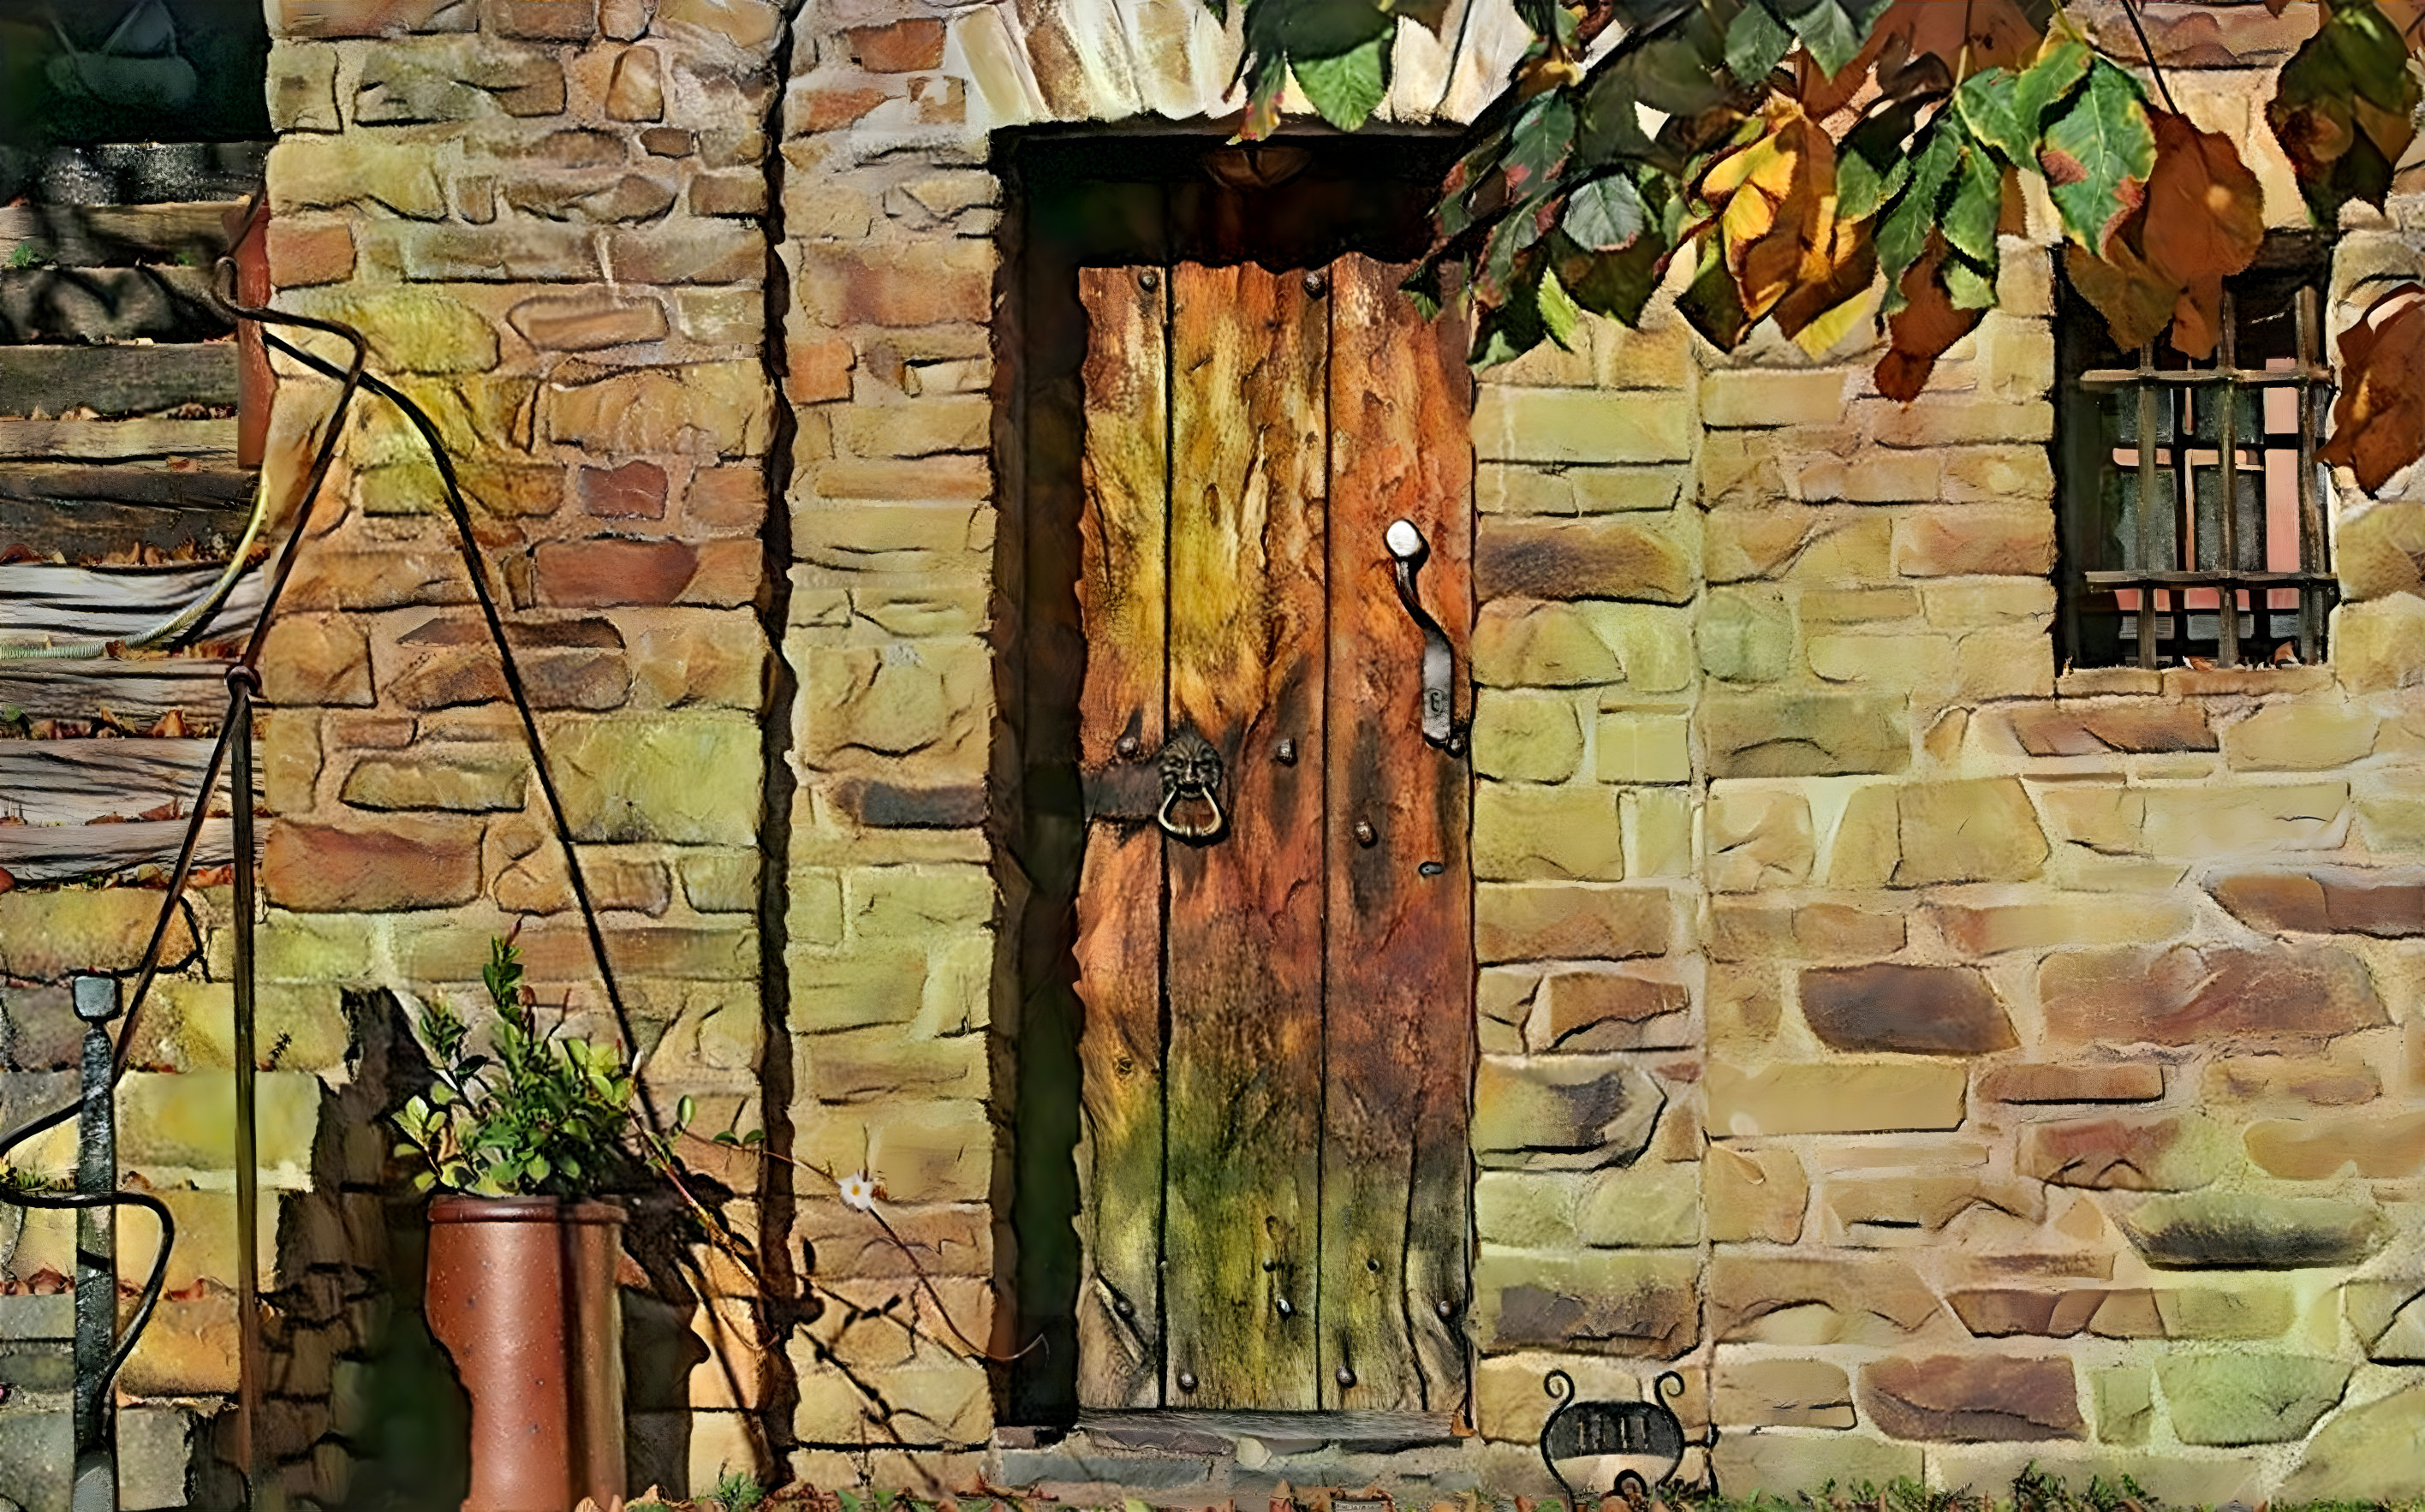 Doorway to an old house